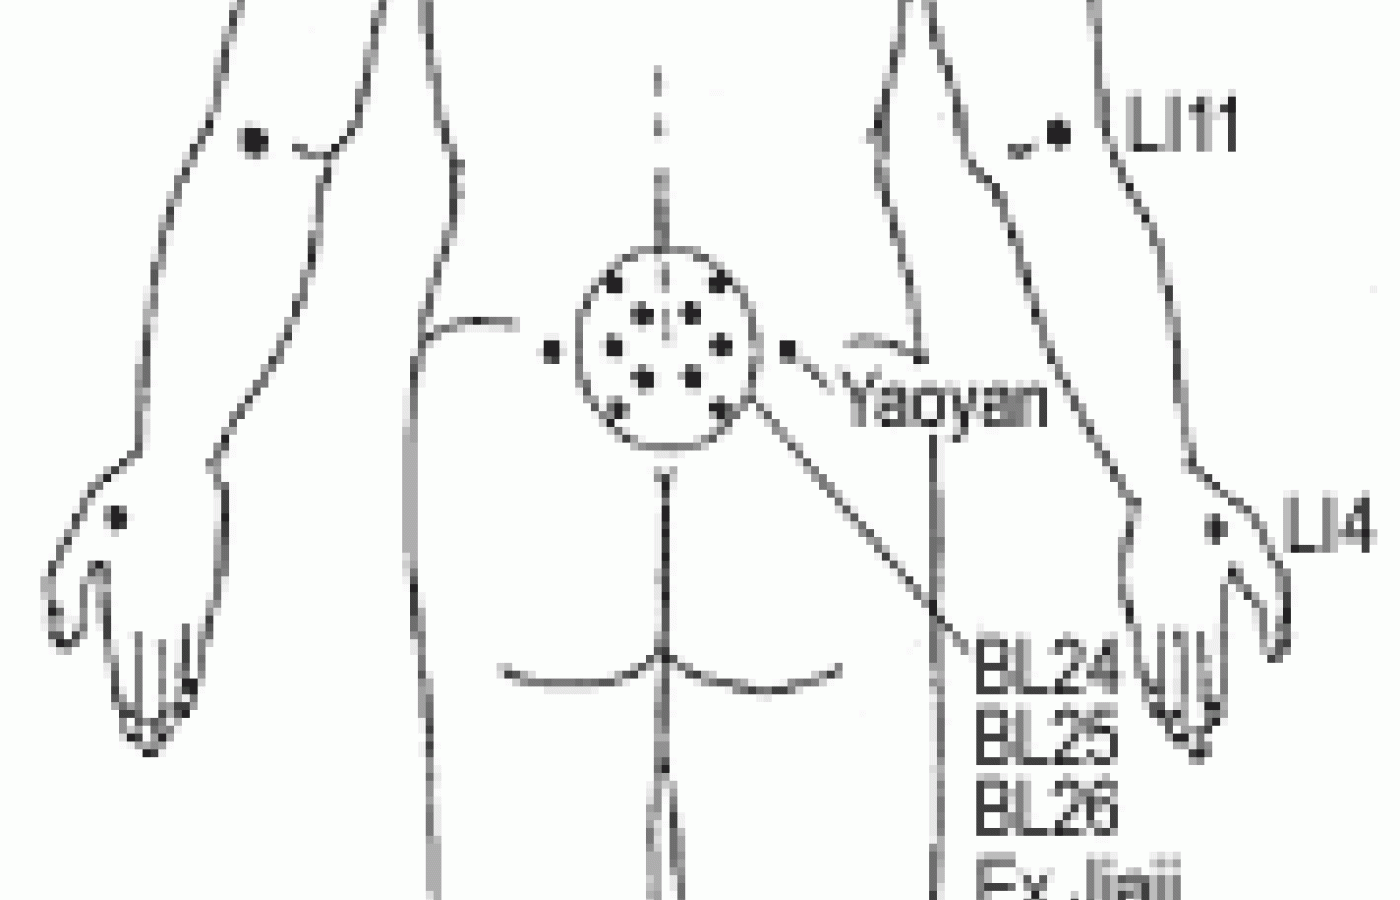 Illustration of acupuncture points.